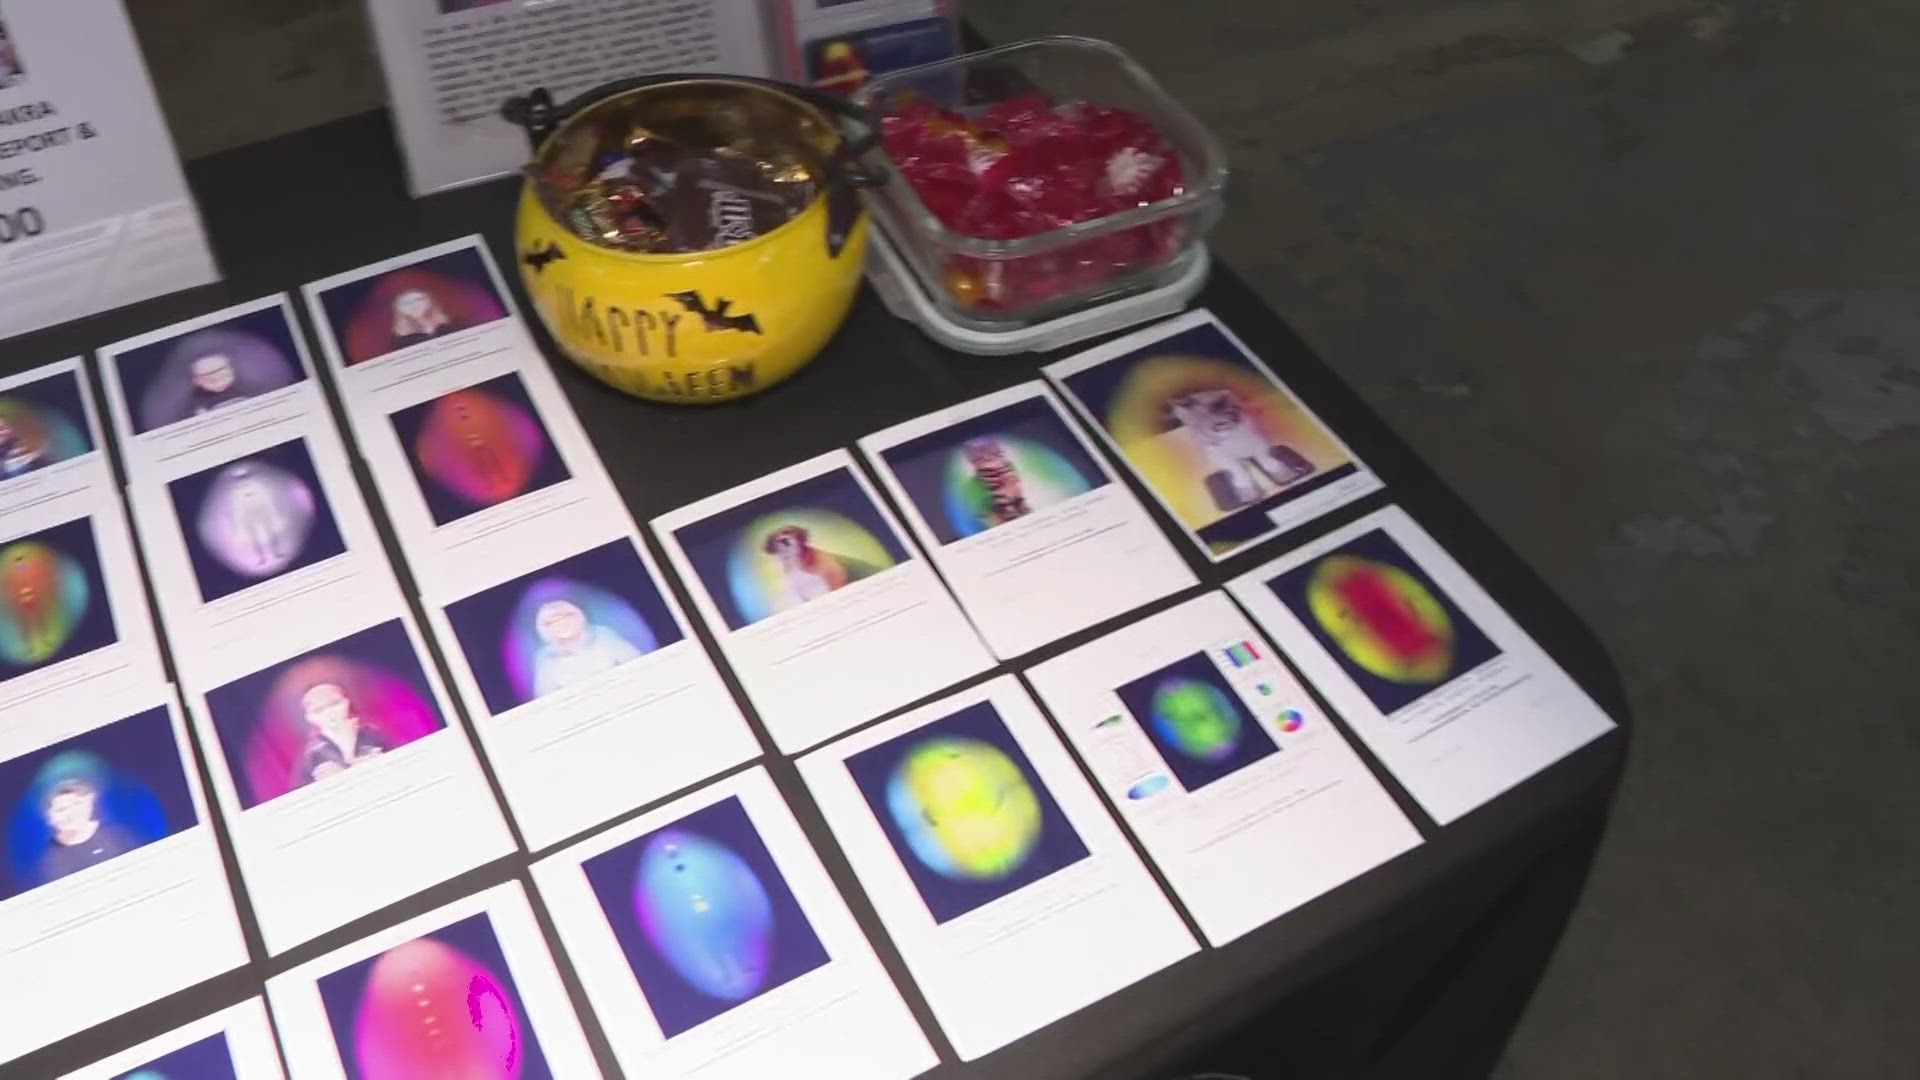 3News' Kierra Cotton gave a preview of the Halloween Psychic & Holistic Expo in Canton